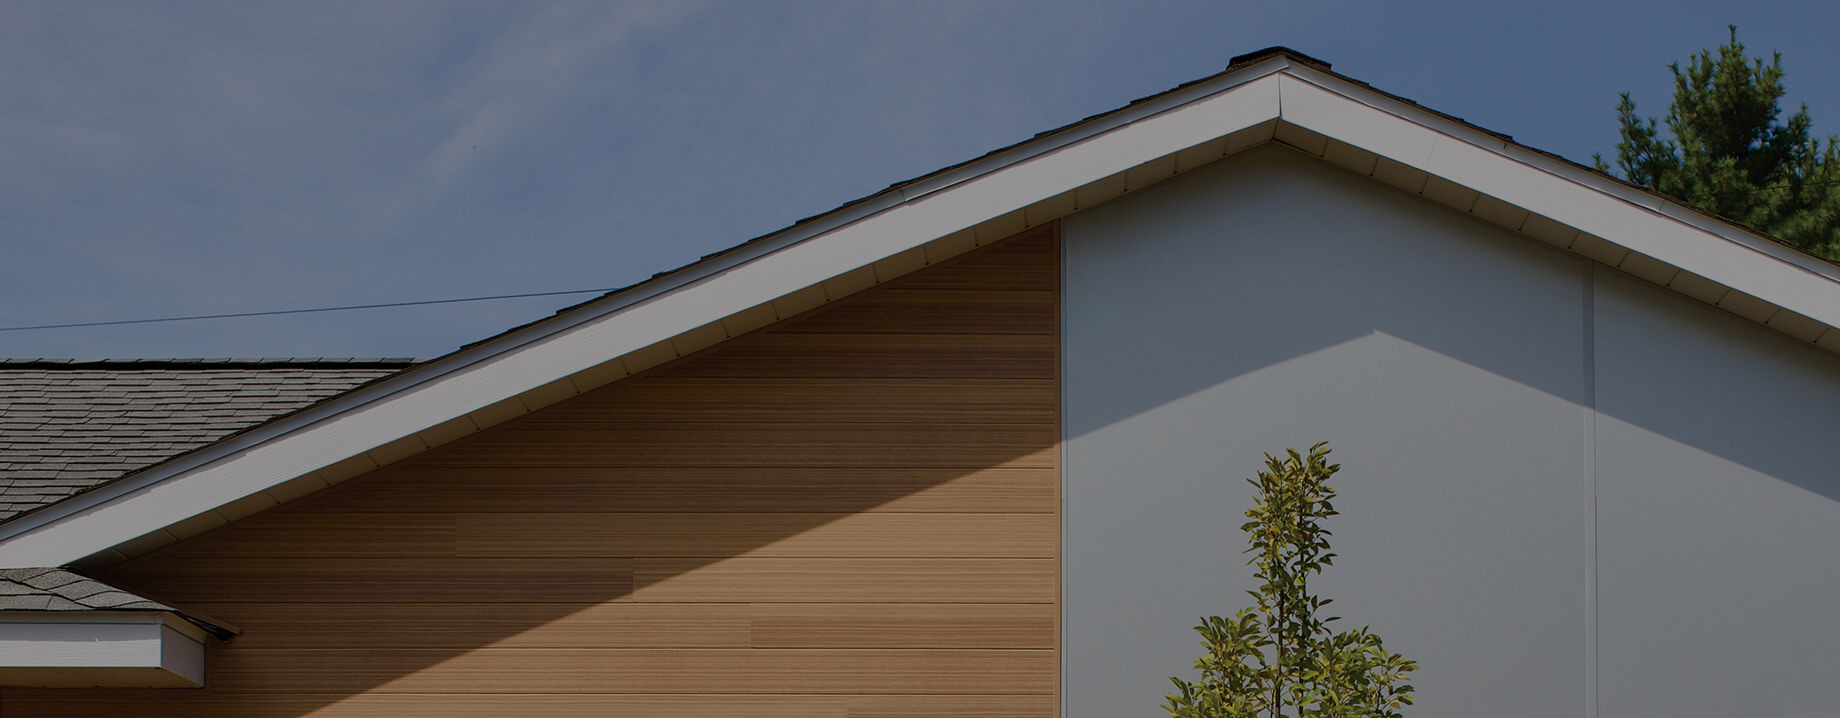 Homeowners Want the Best Value When Choosing a Siding Solution